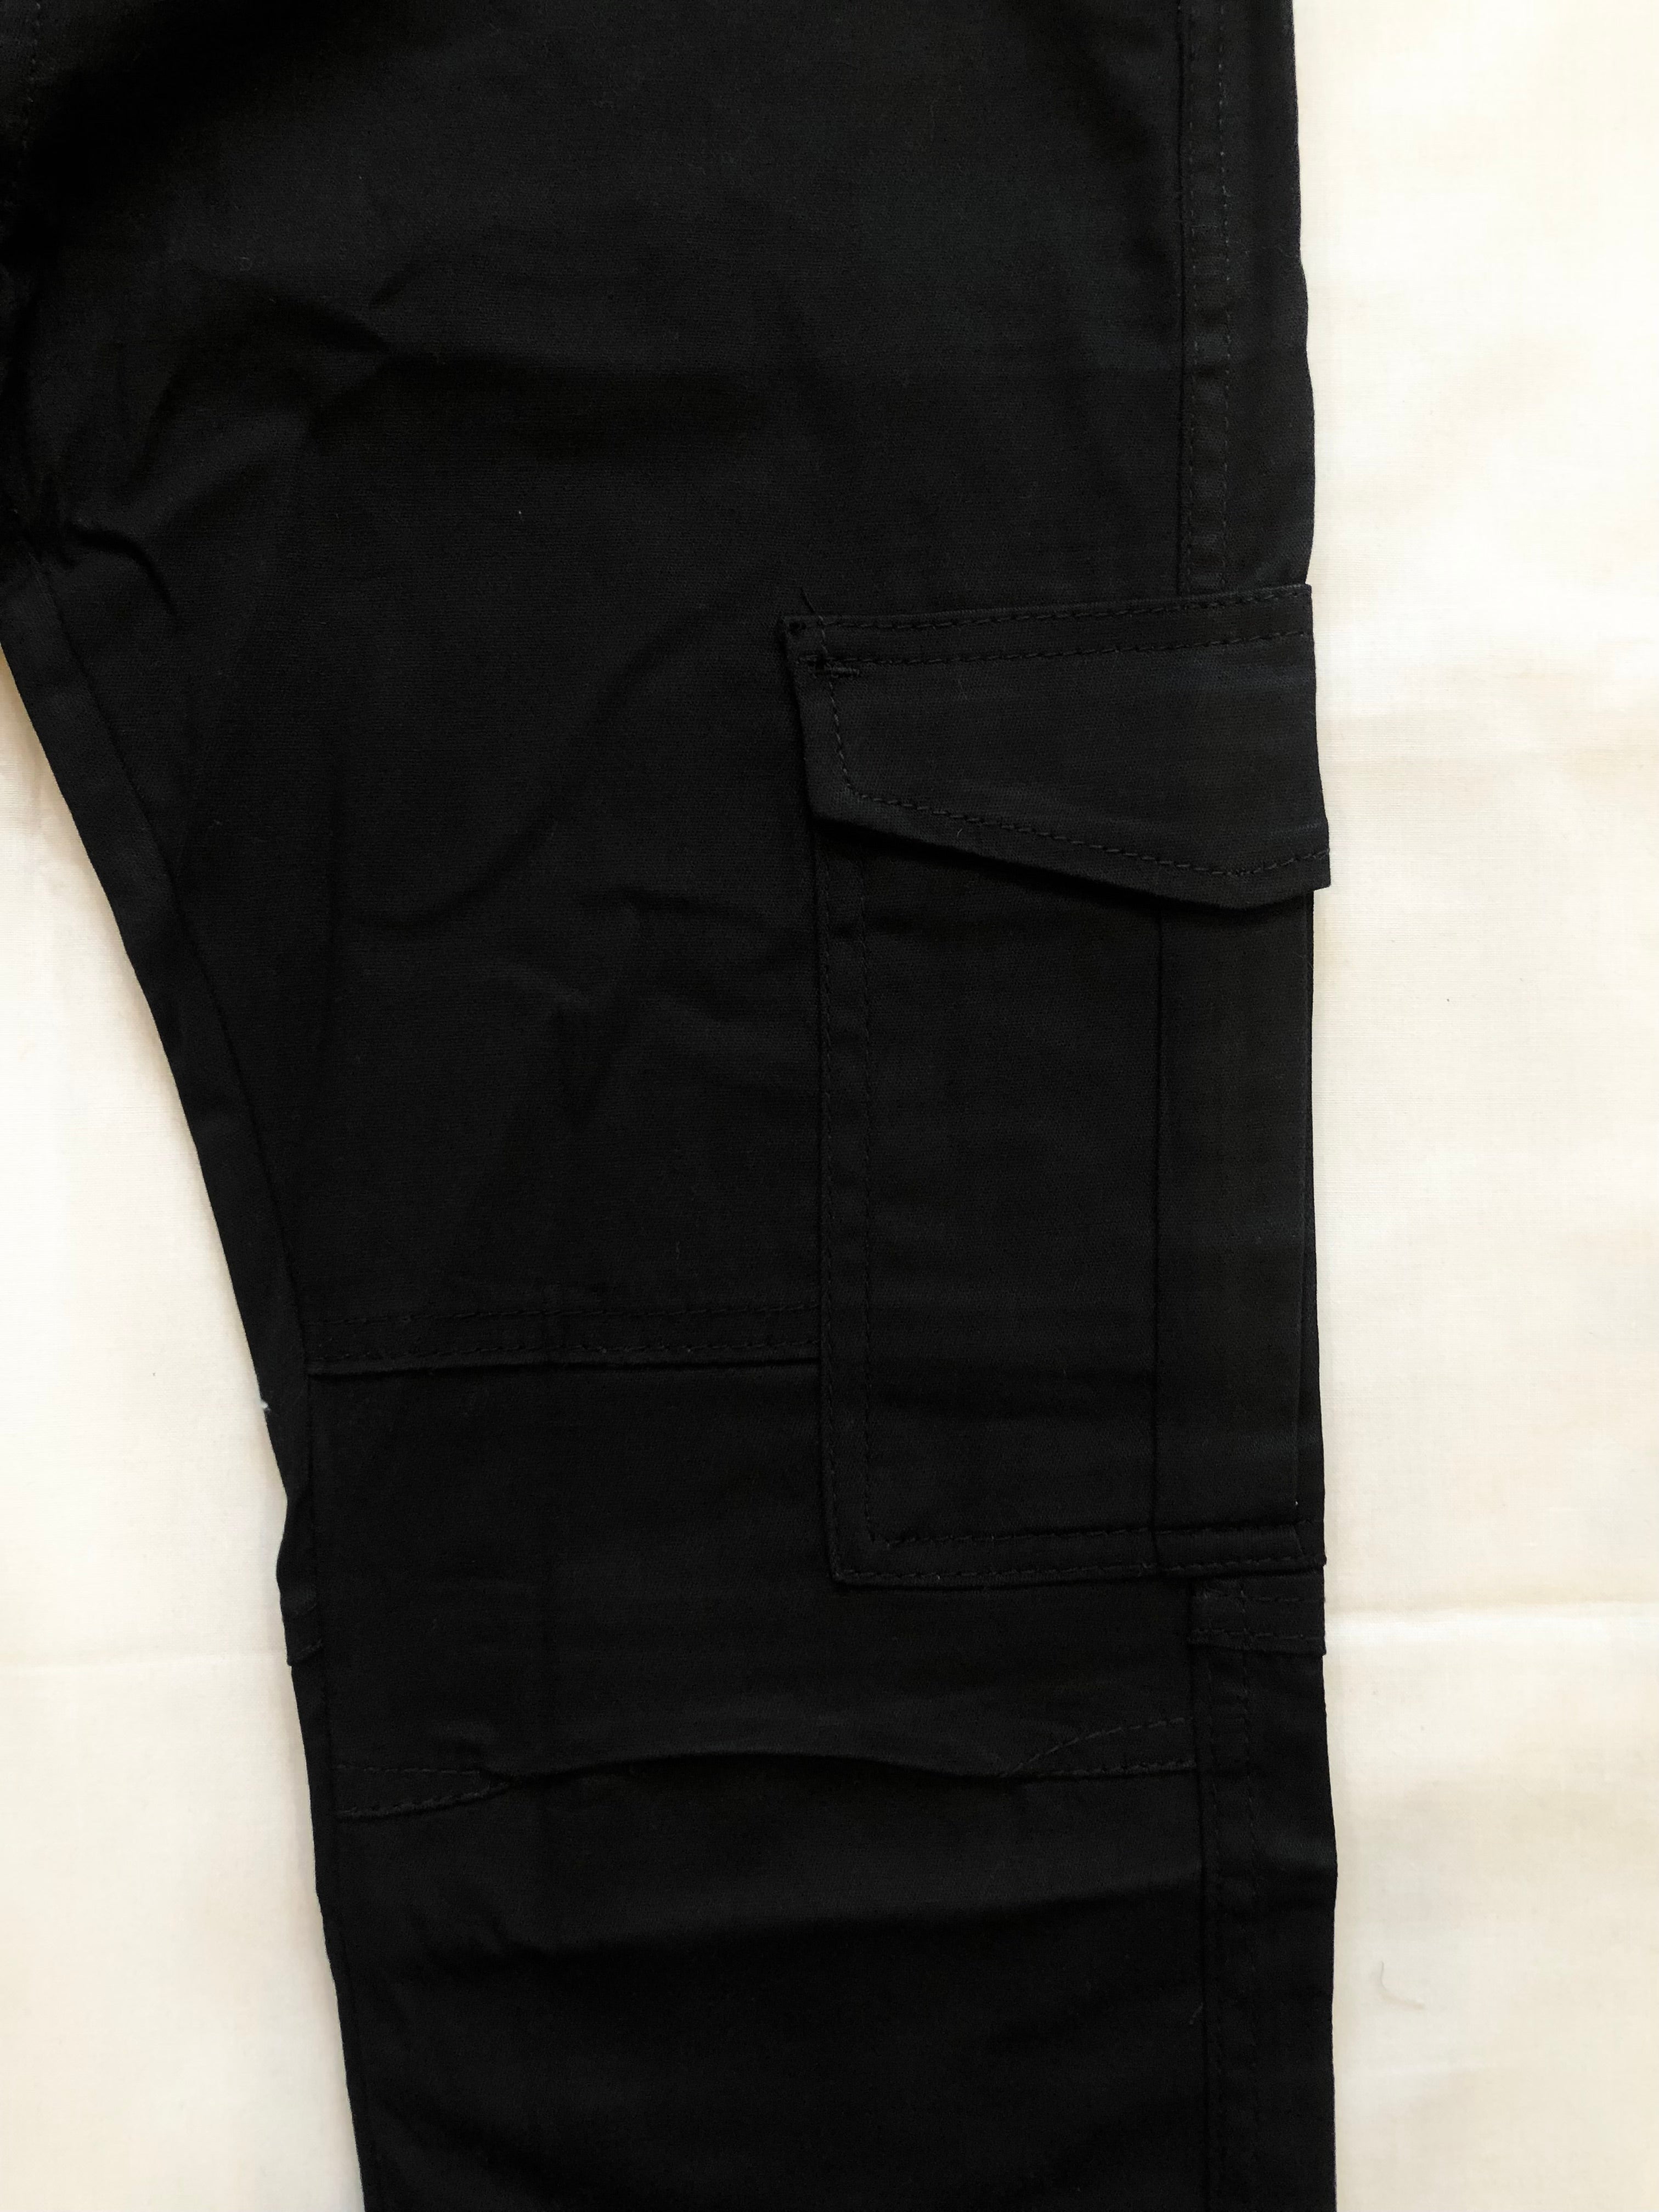 New With Tags Free People Tahiti Cargo Pants Jet Black Ankle Length Size  Small | eBay